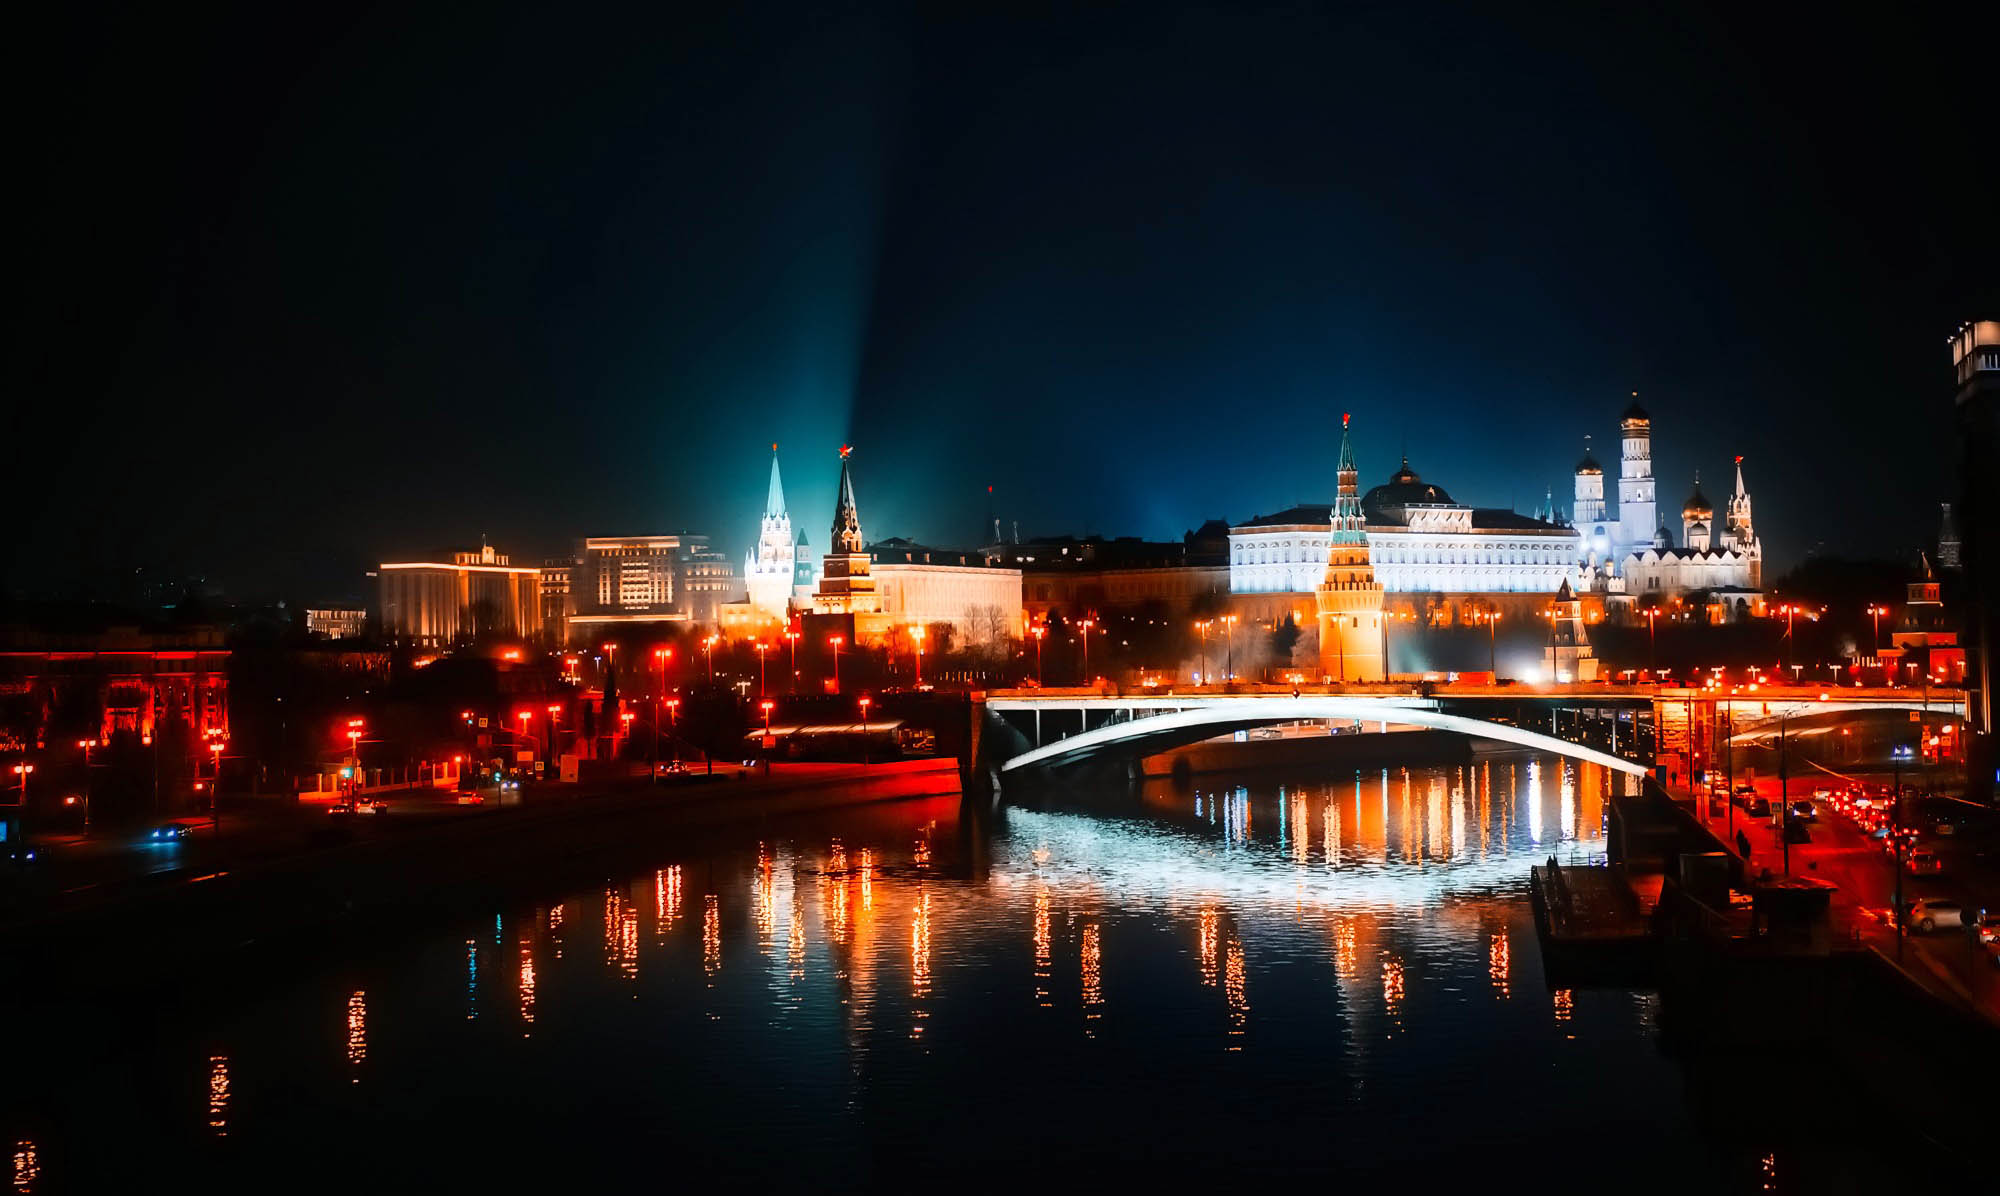 Night City View in Moscow, Russia image - Free stock photo - Public ...